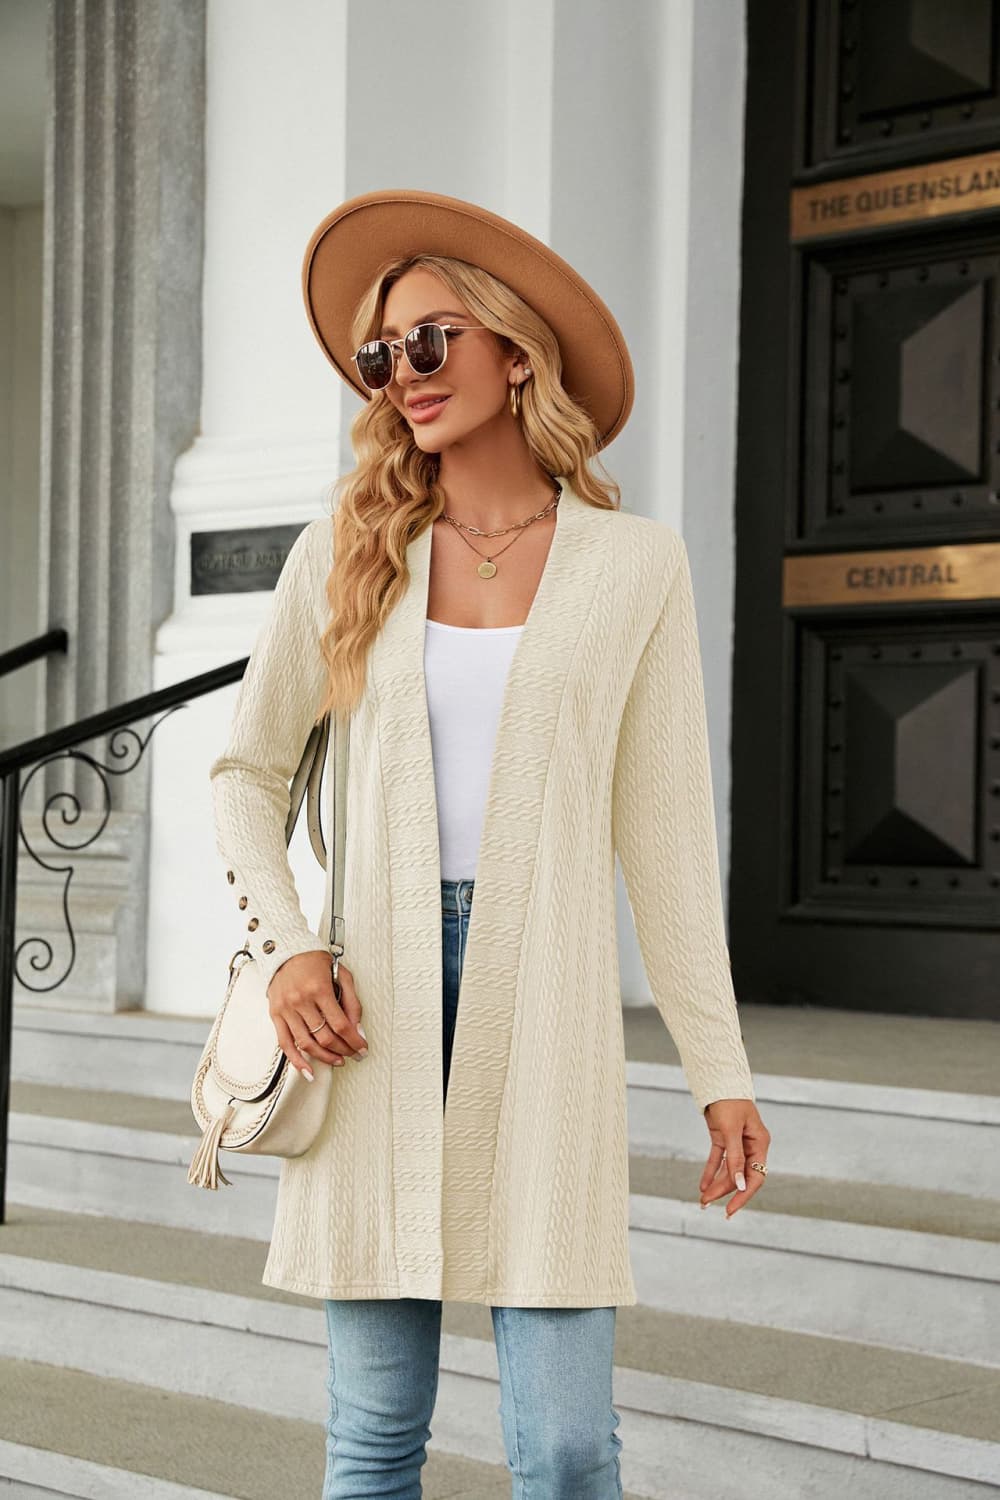 Long Sleeve Open Front Cardigan - White / S - Women’s Clothing & Accessories - Shirts & Tops - 1 - 2024